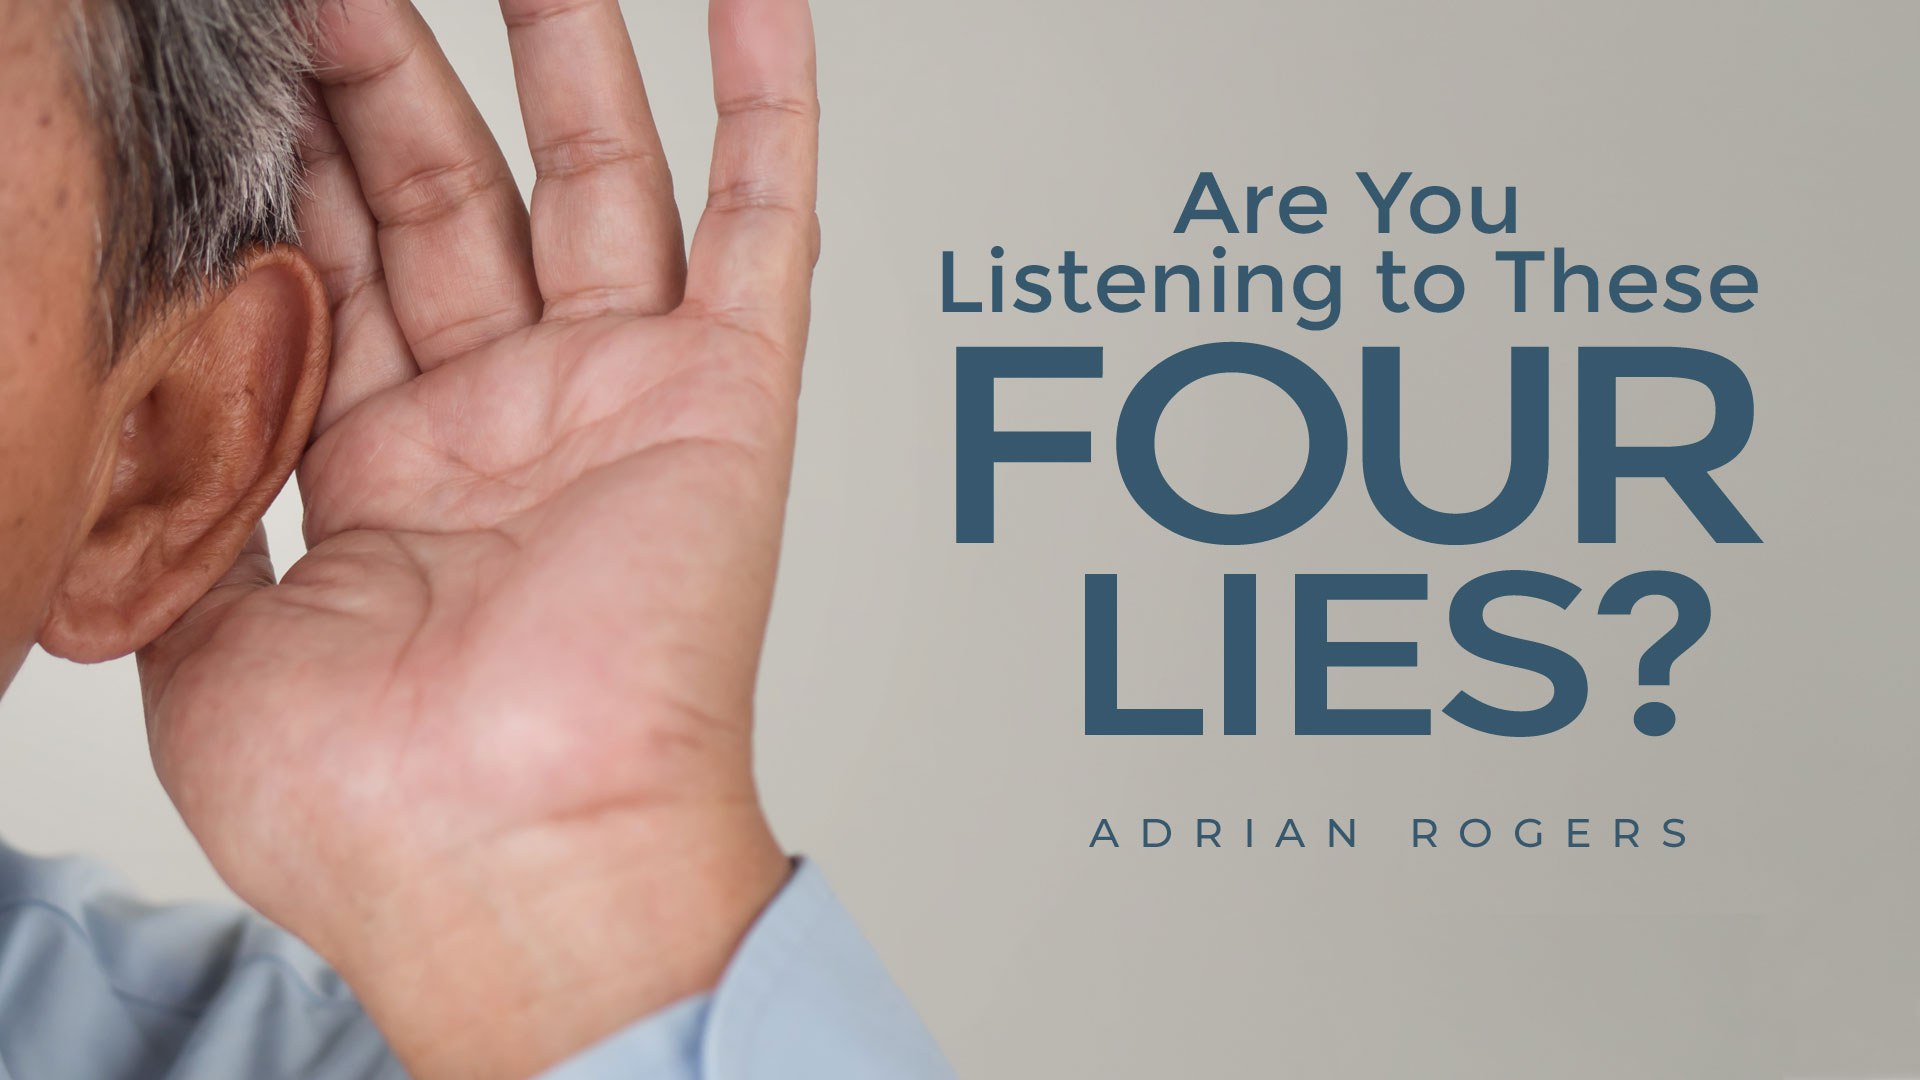 Are You Listening to These Four Lies?